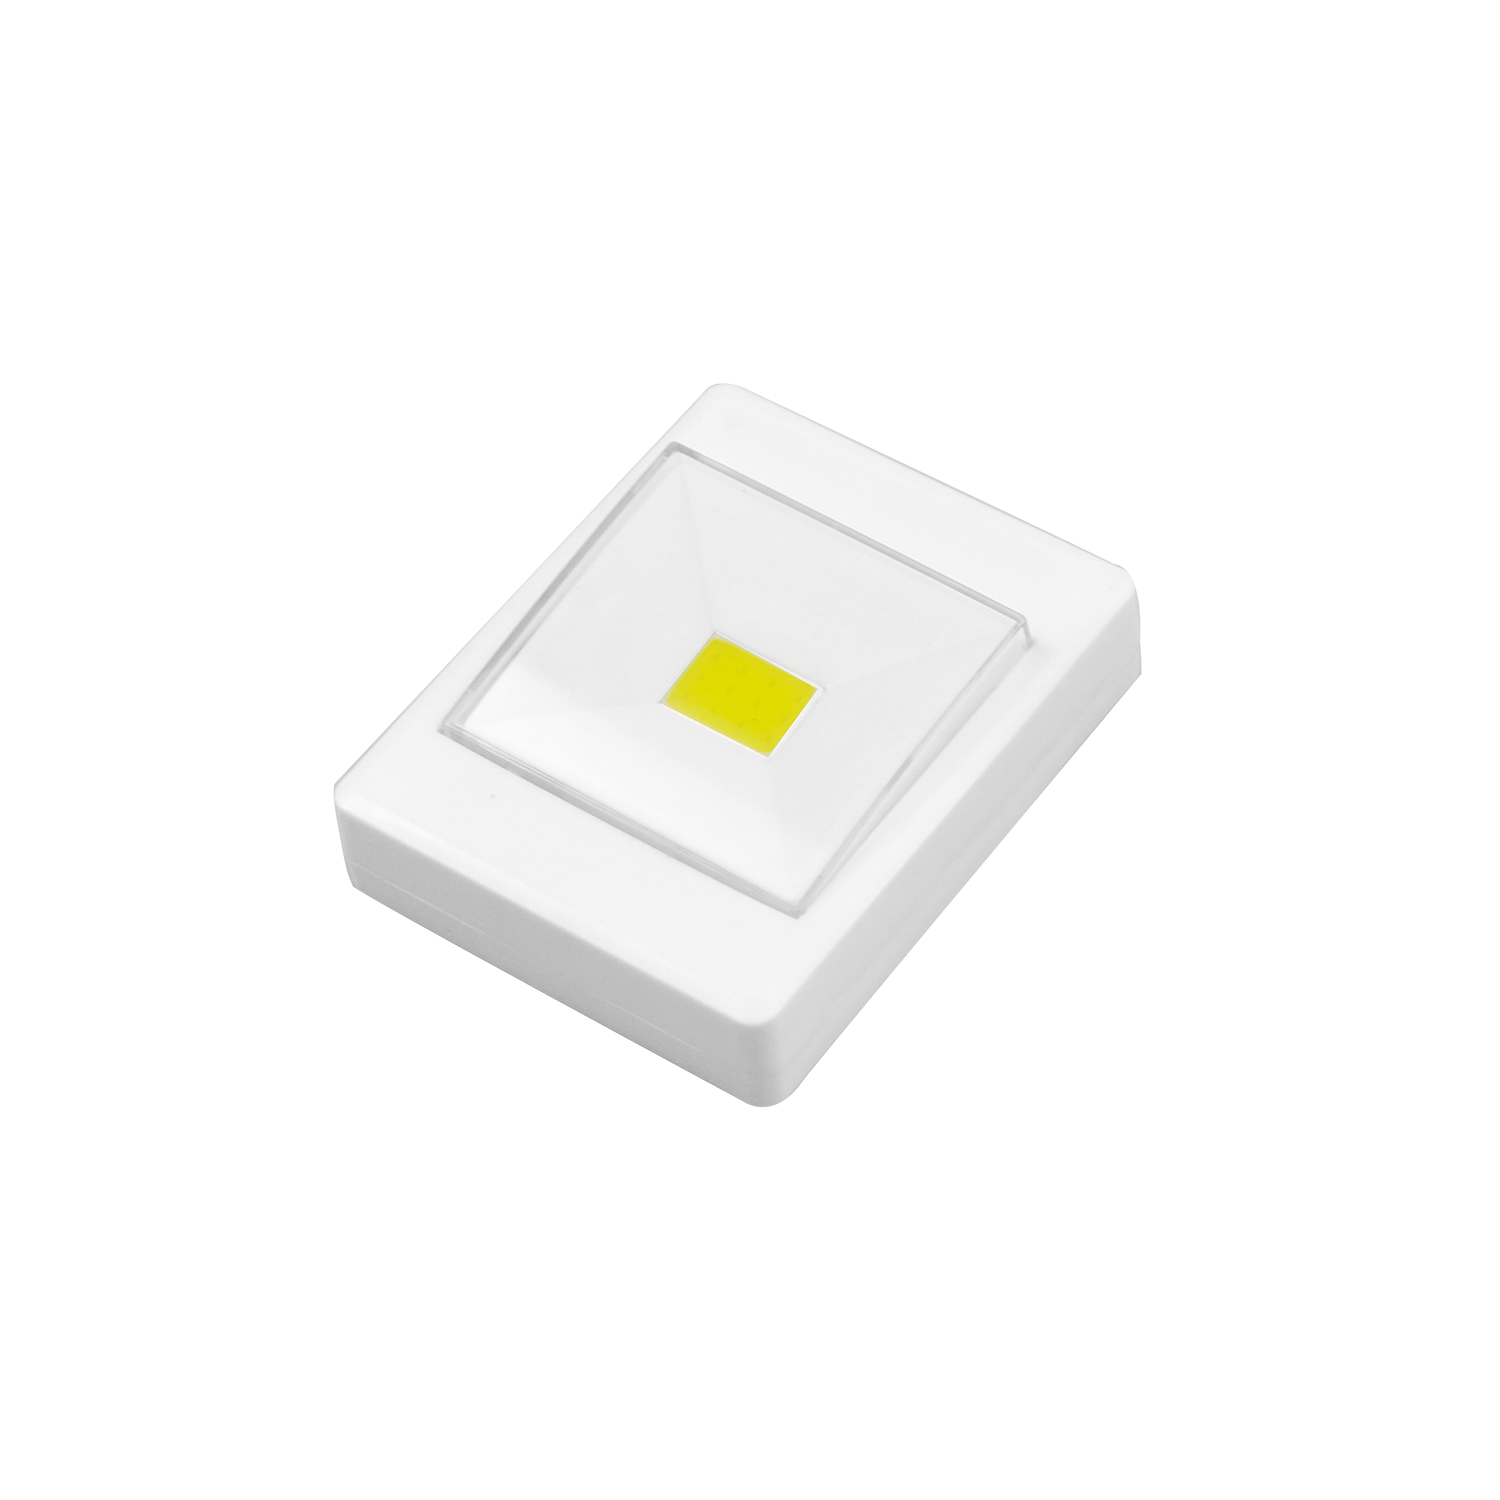 On/off plastic COB light with 2pcs magnet at back